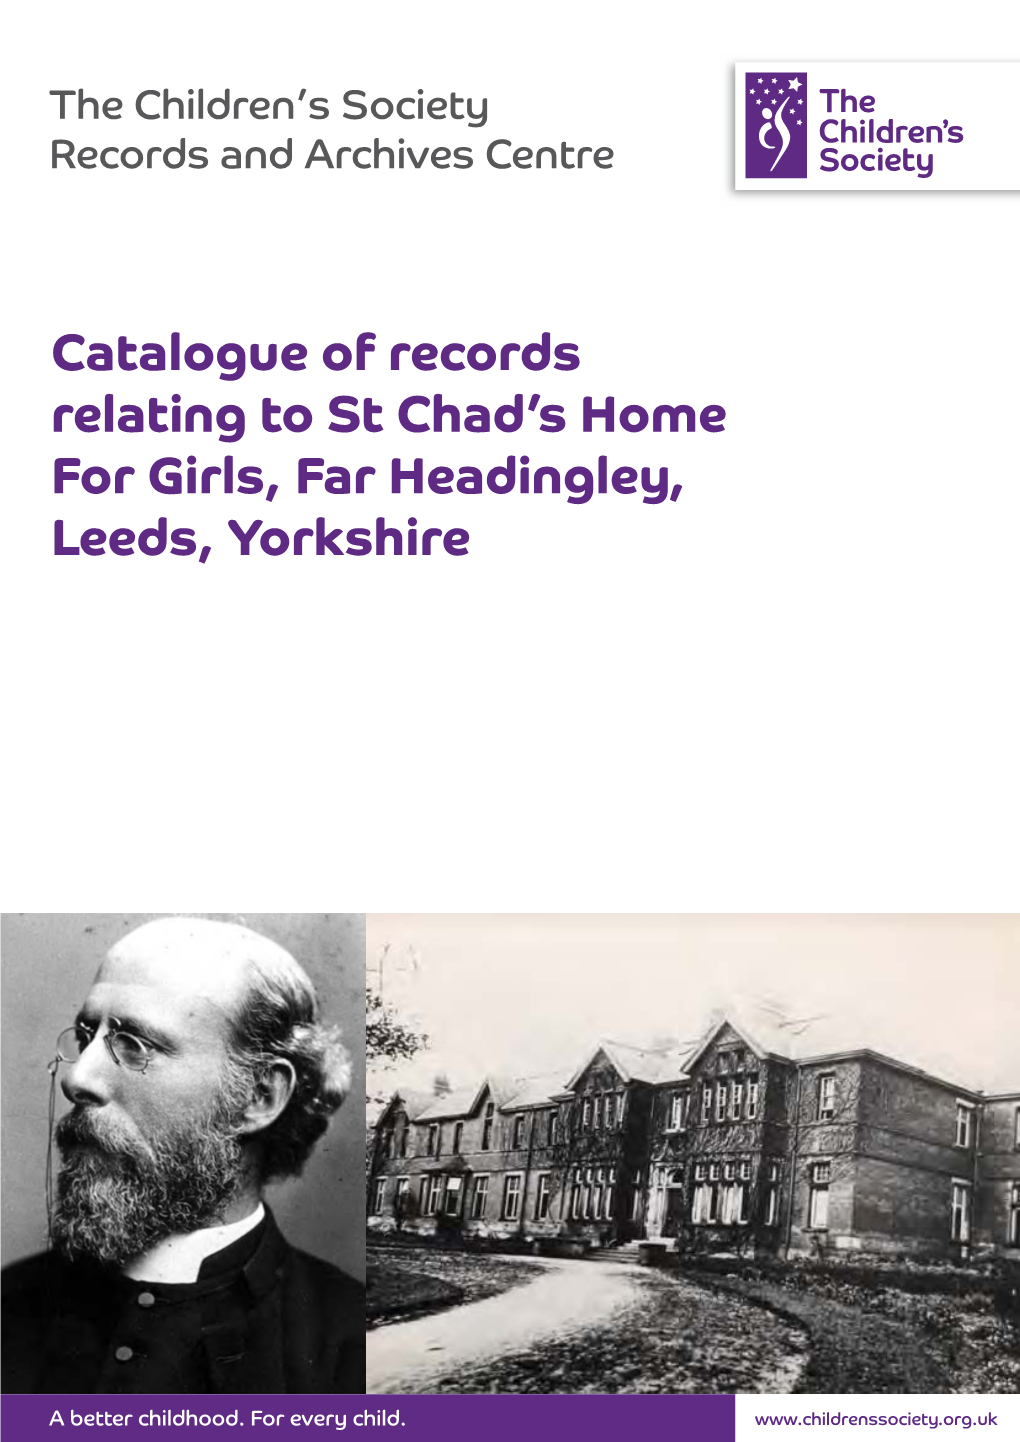 Records Relating to St. Chad's Home, Far Headingley